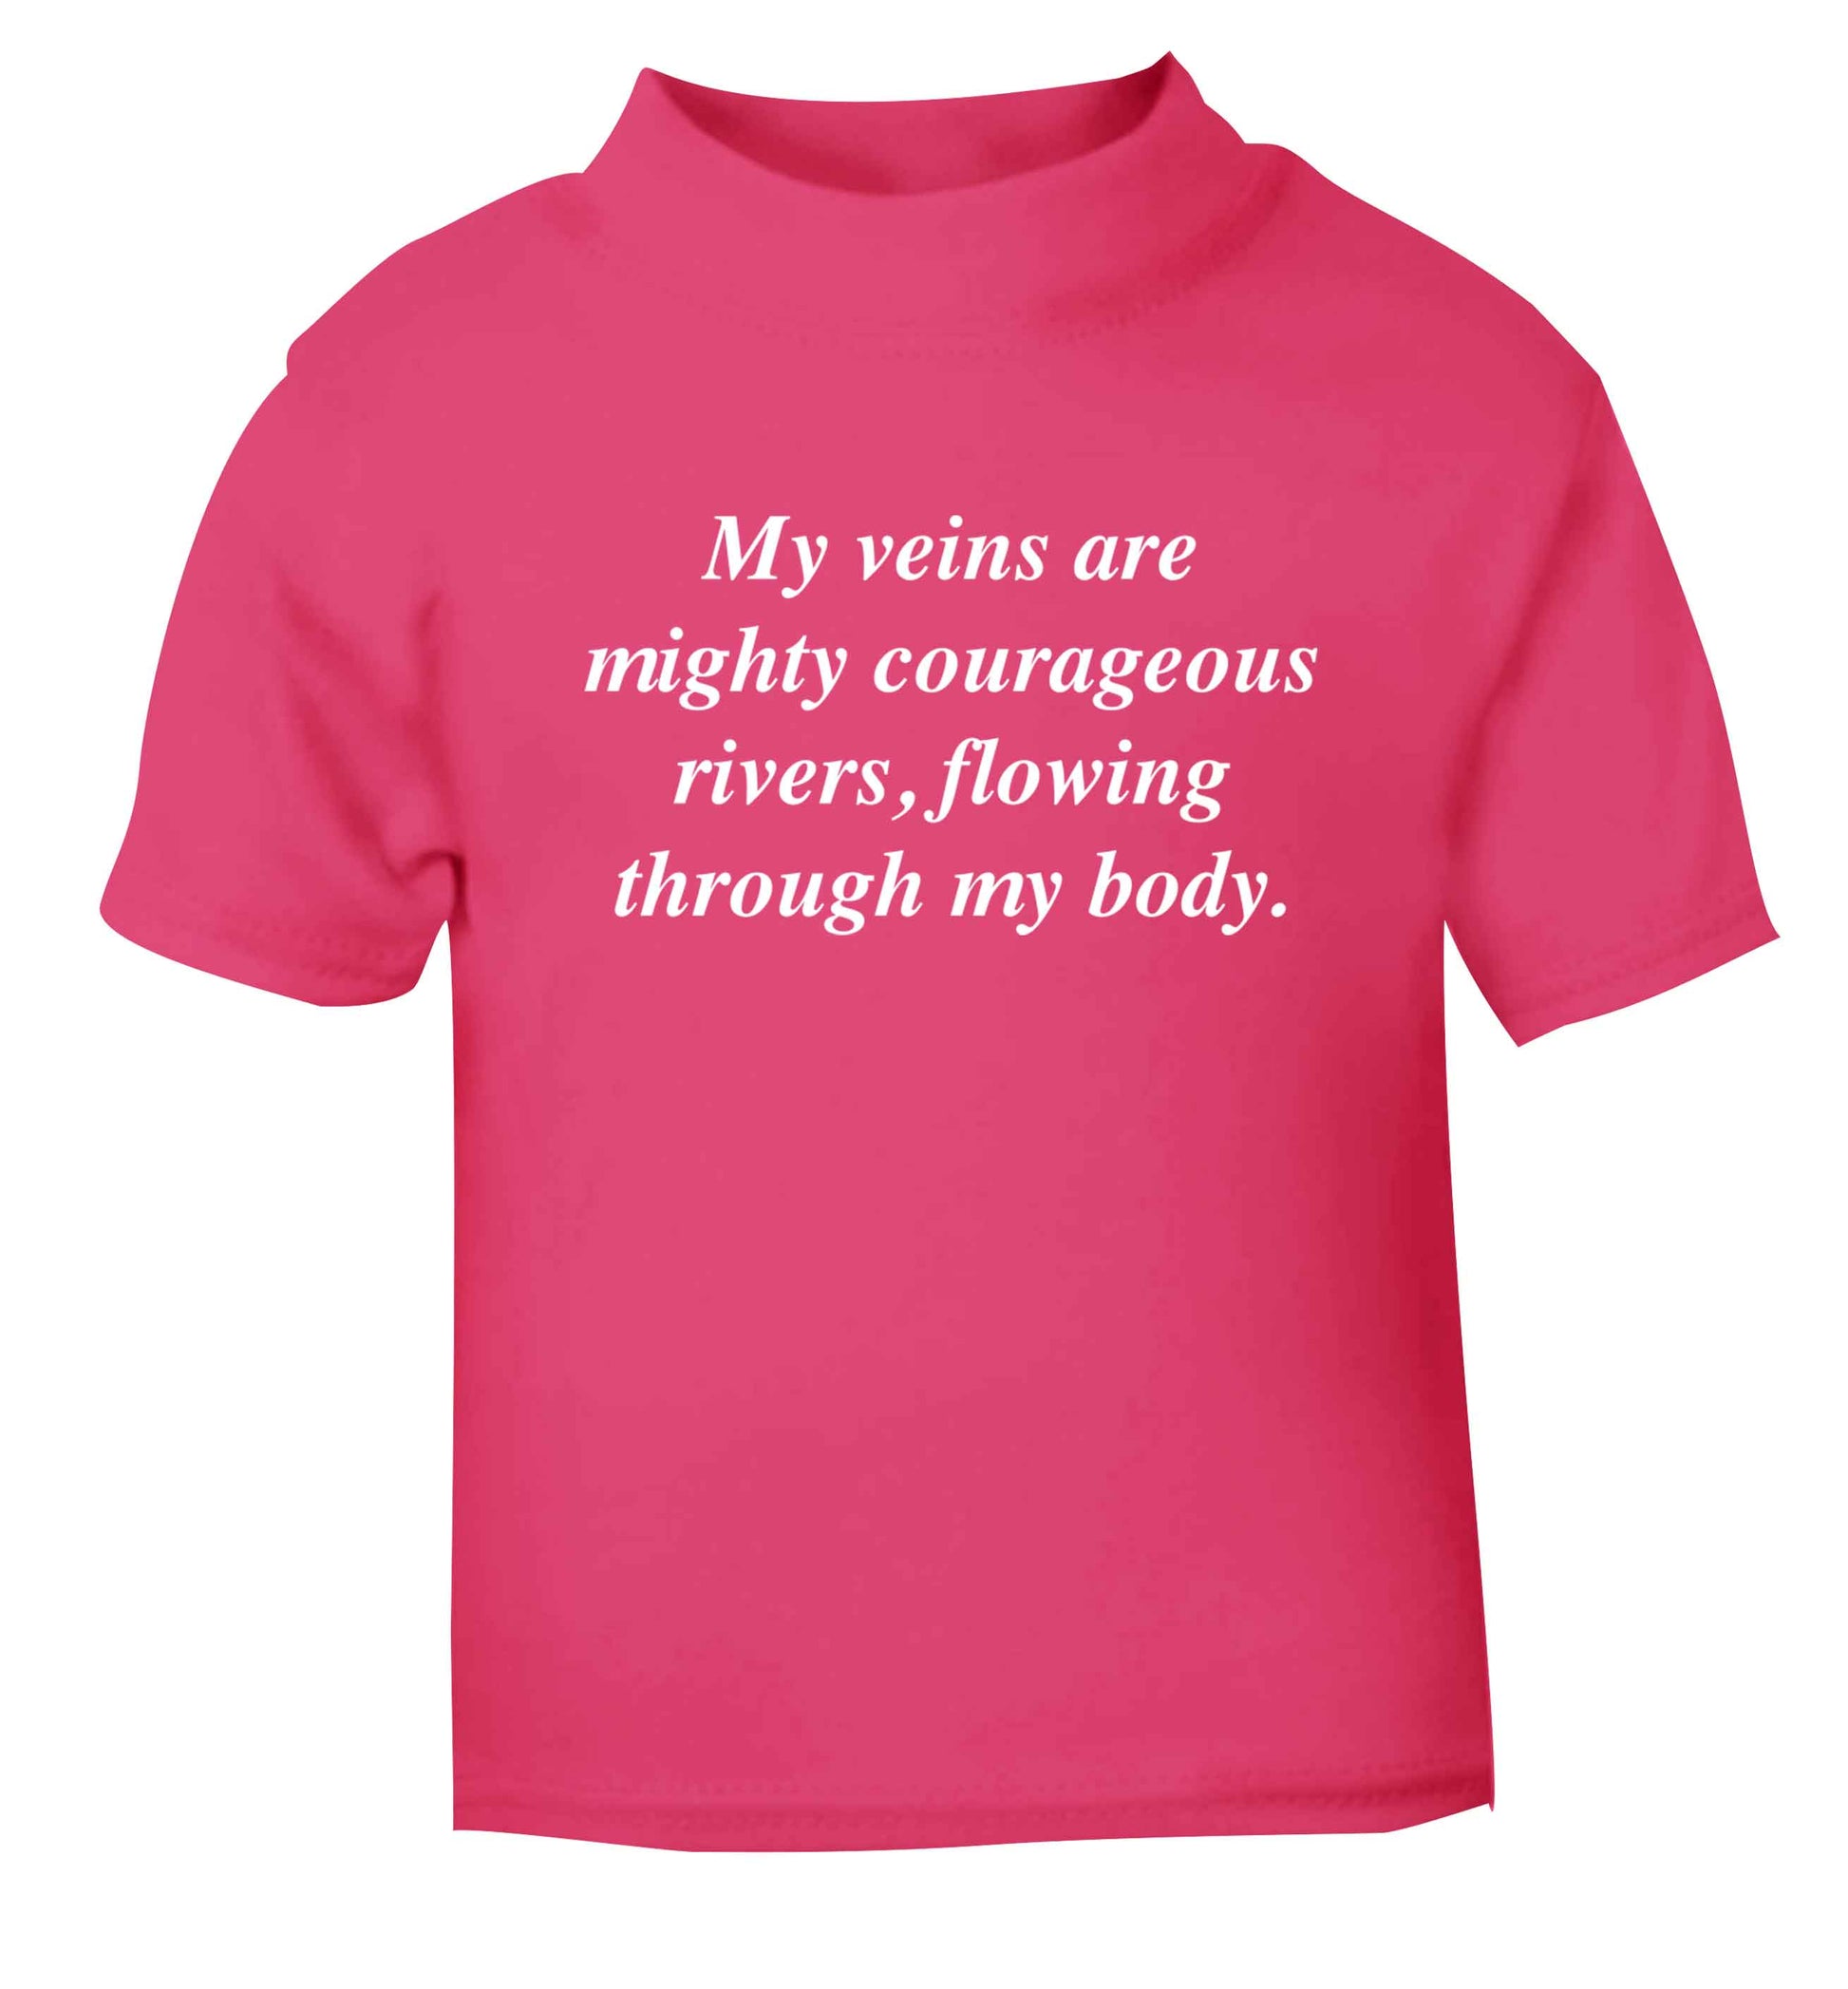 My veins are mighty courageous rivers, flowing through my body pink baby toddler Tshirt 2 Years